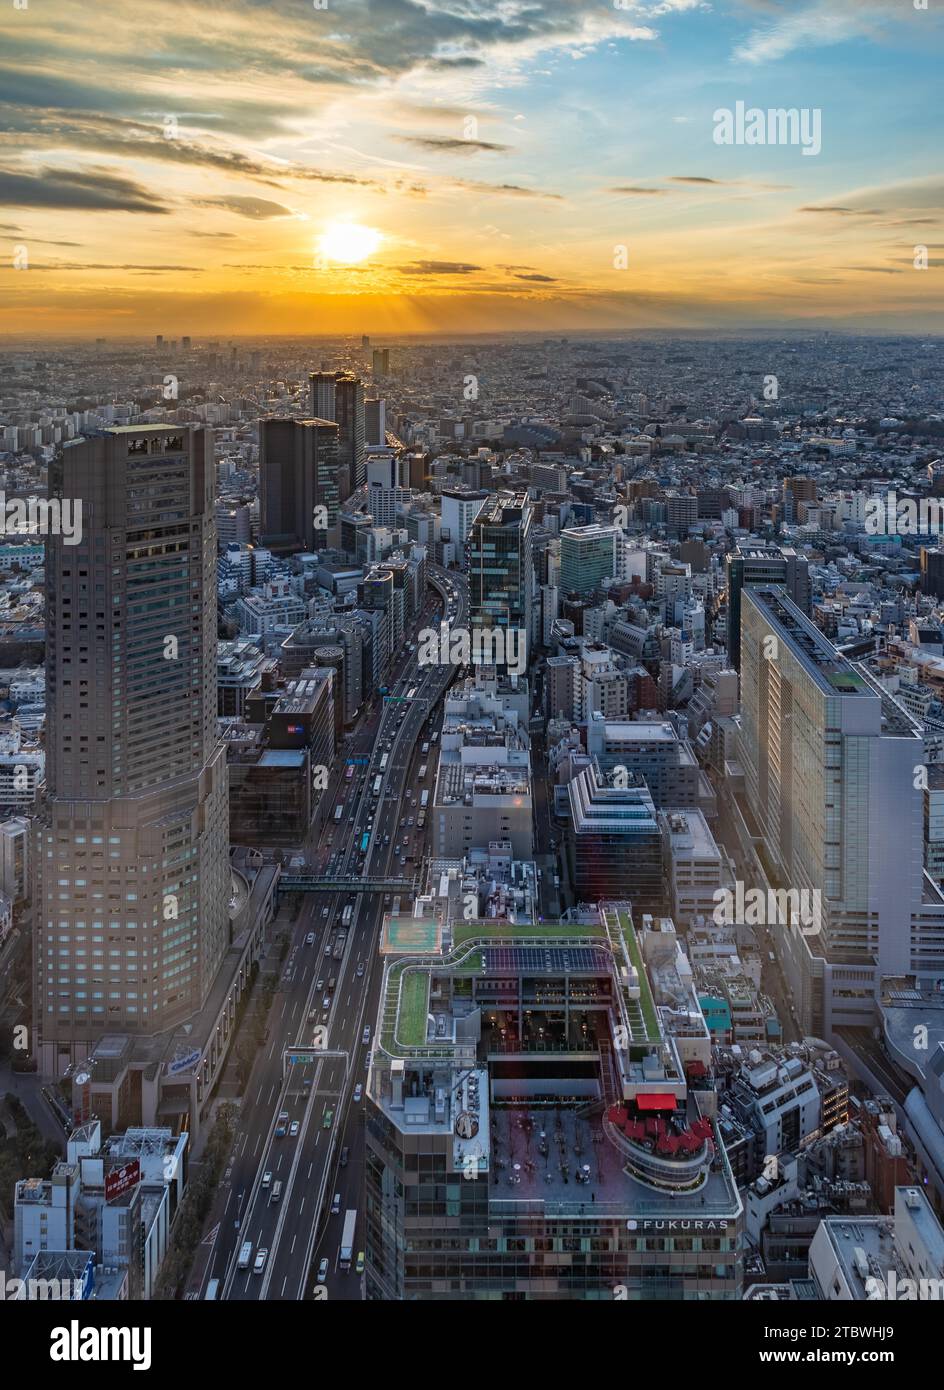 A picture of the Tokyo cityscape at sunset Stock Photo